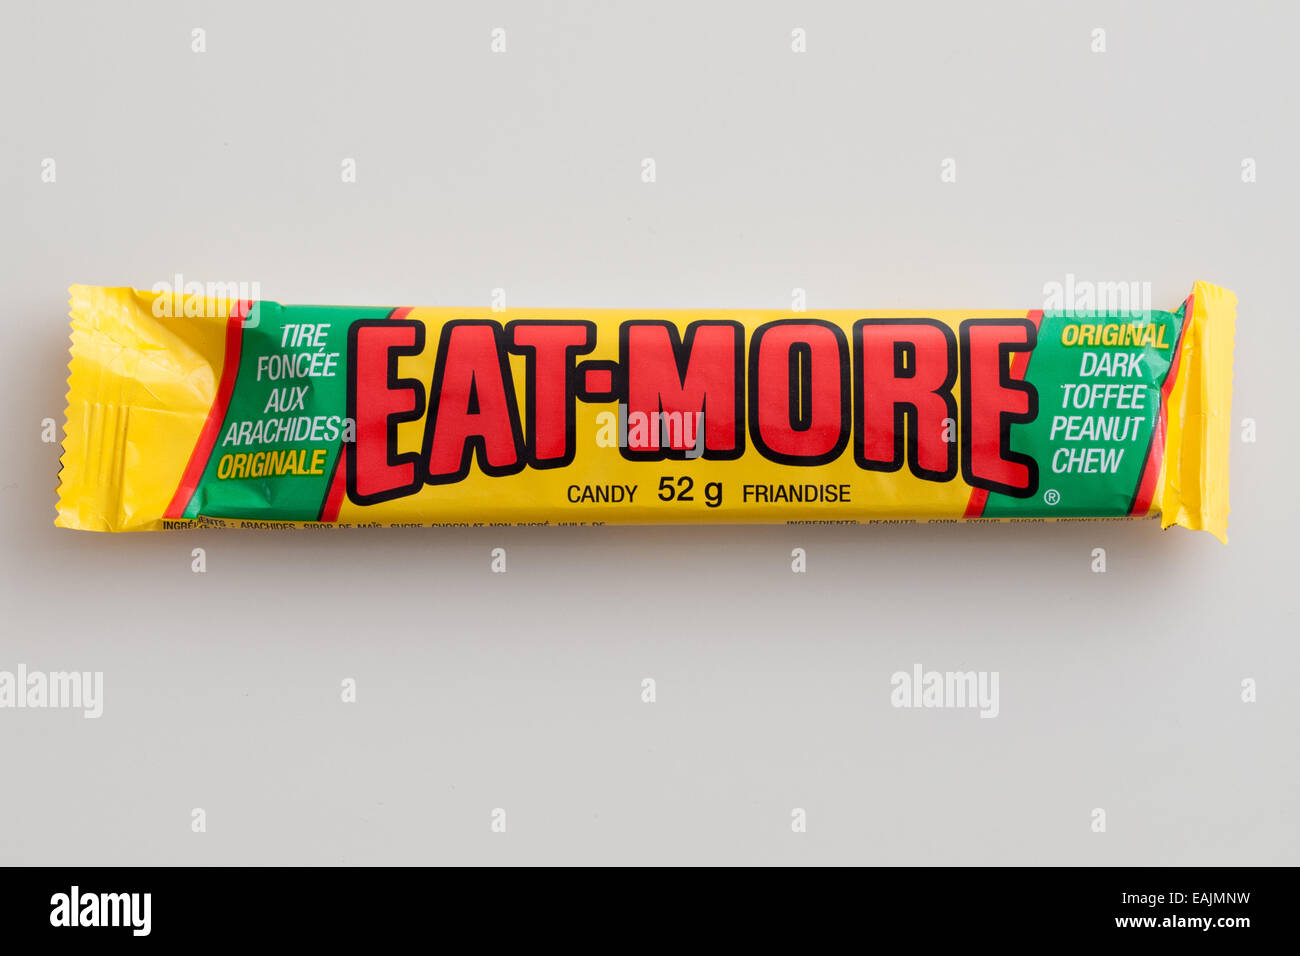 An Eat-More candy bar, made by The Hershey Company. Stock Photo